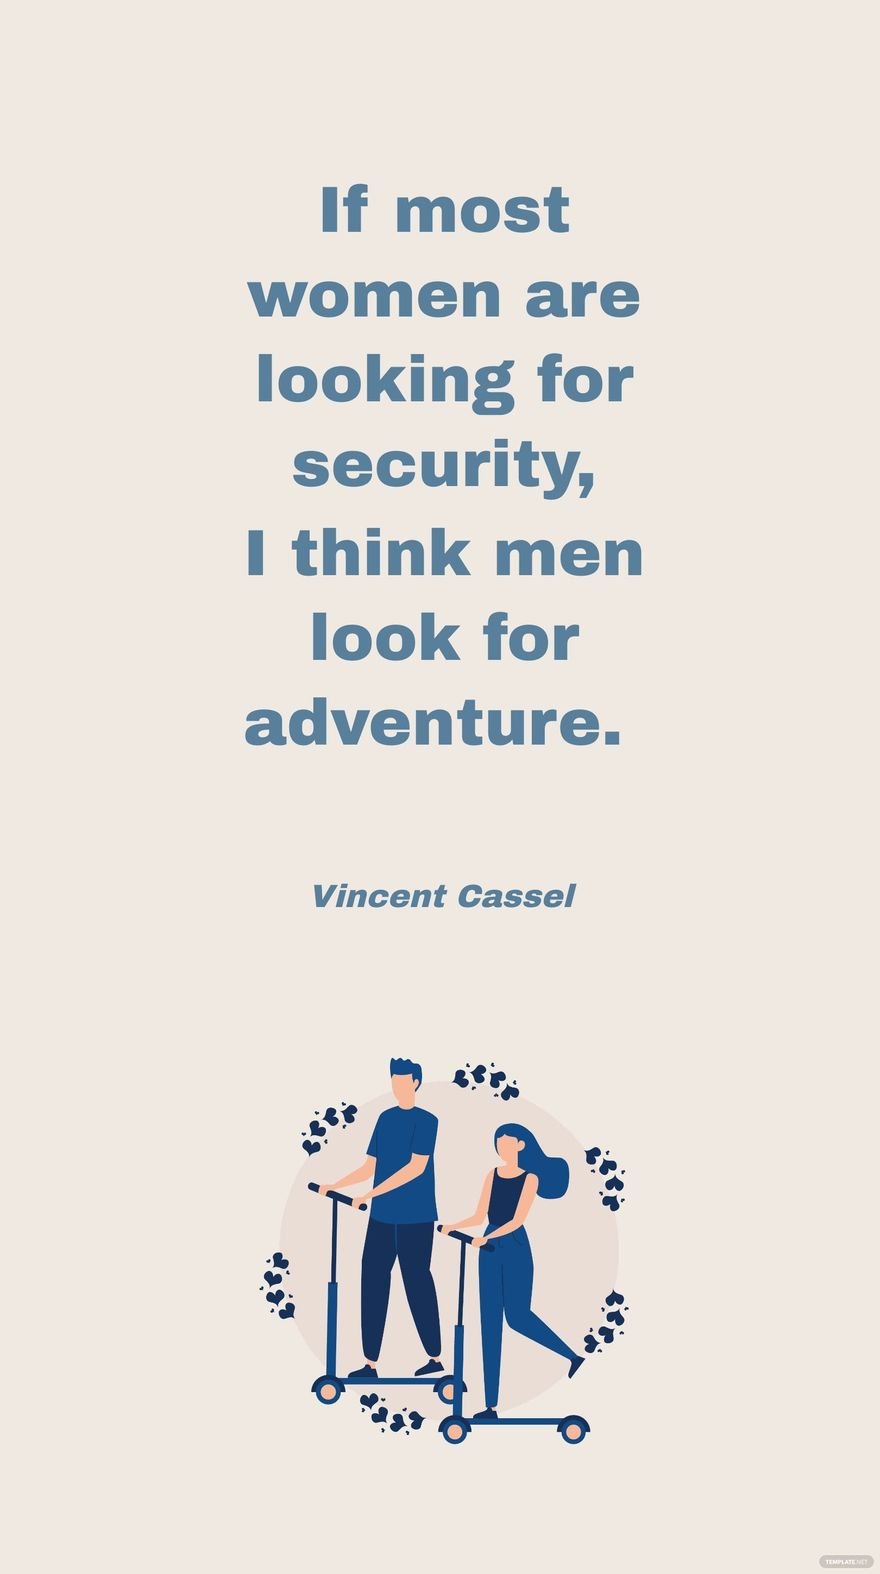 Vincent Cassel - If most women are looking for security, I think men look for adventure. in JPG